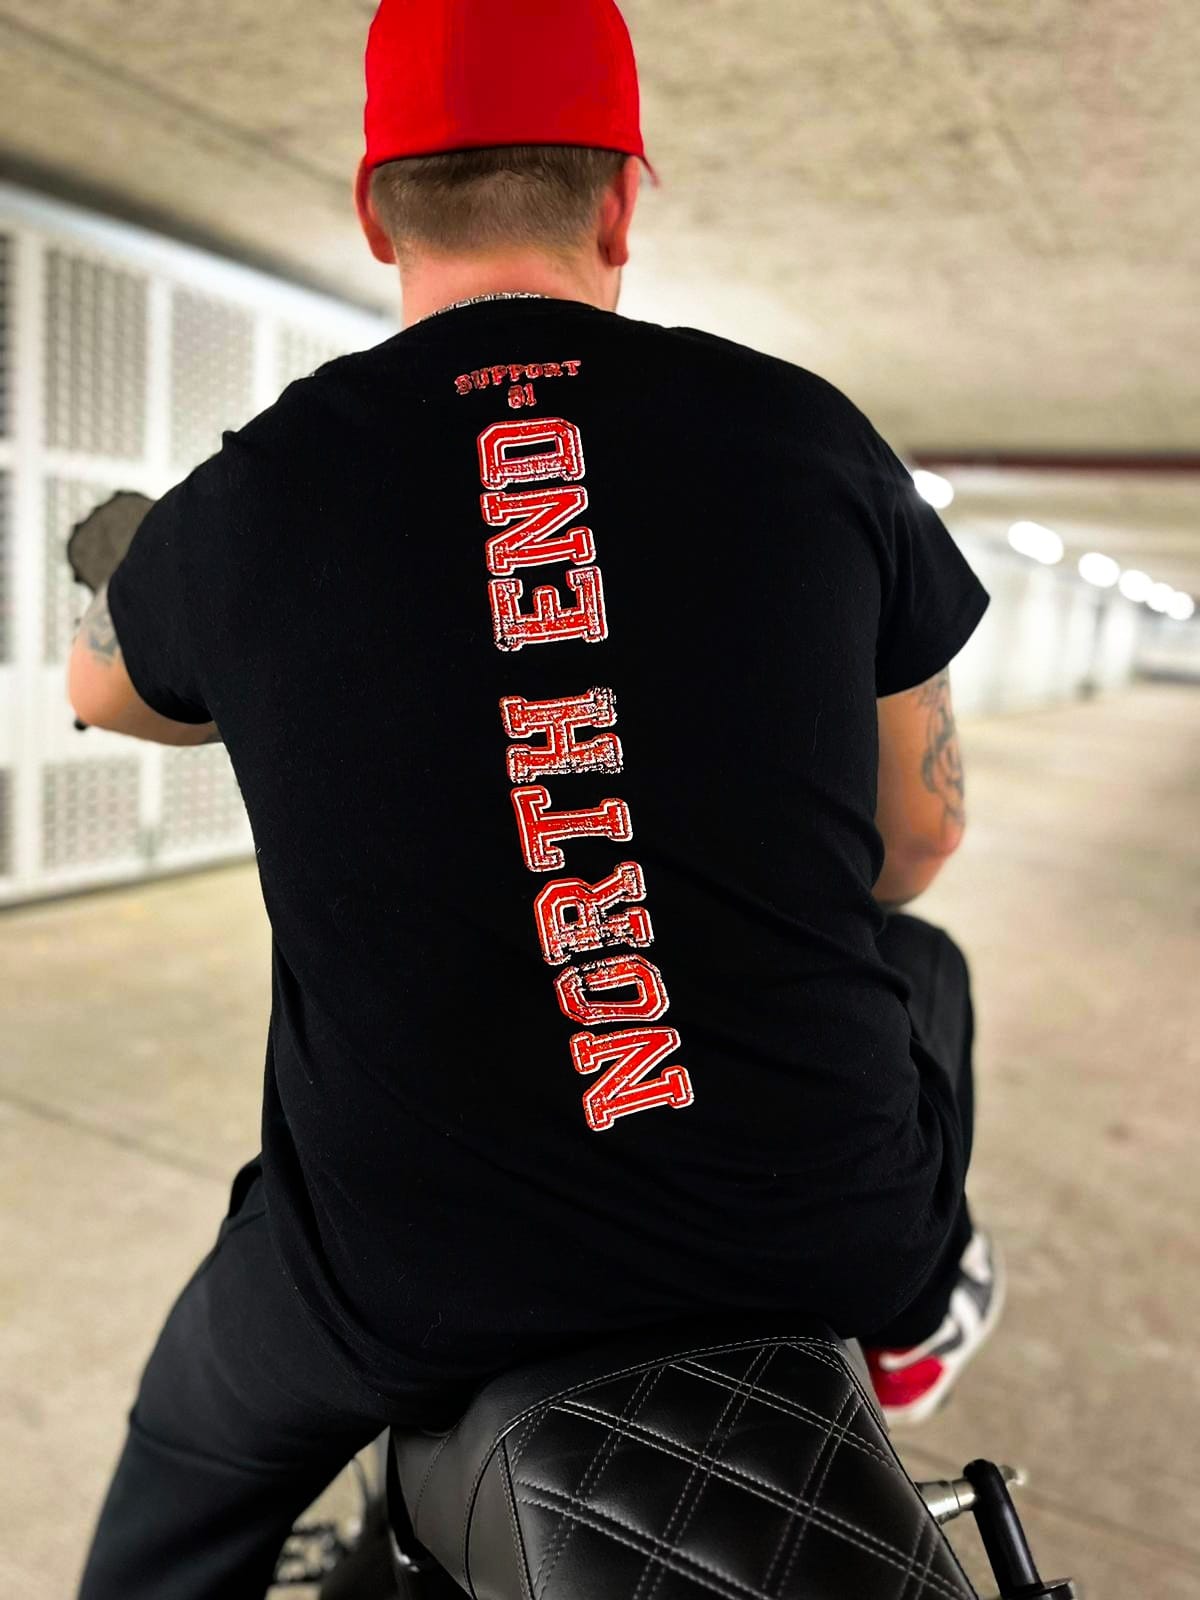 T-Shirt "SUPPORT 81 NORTH END - STREET"